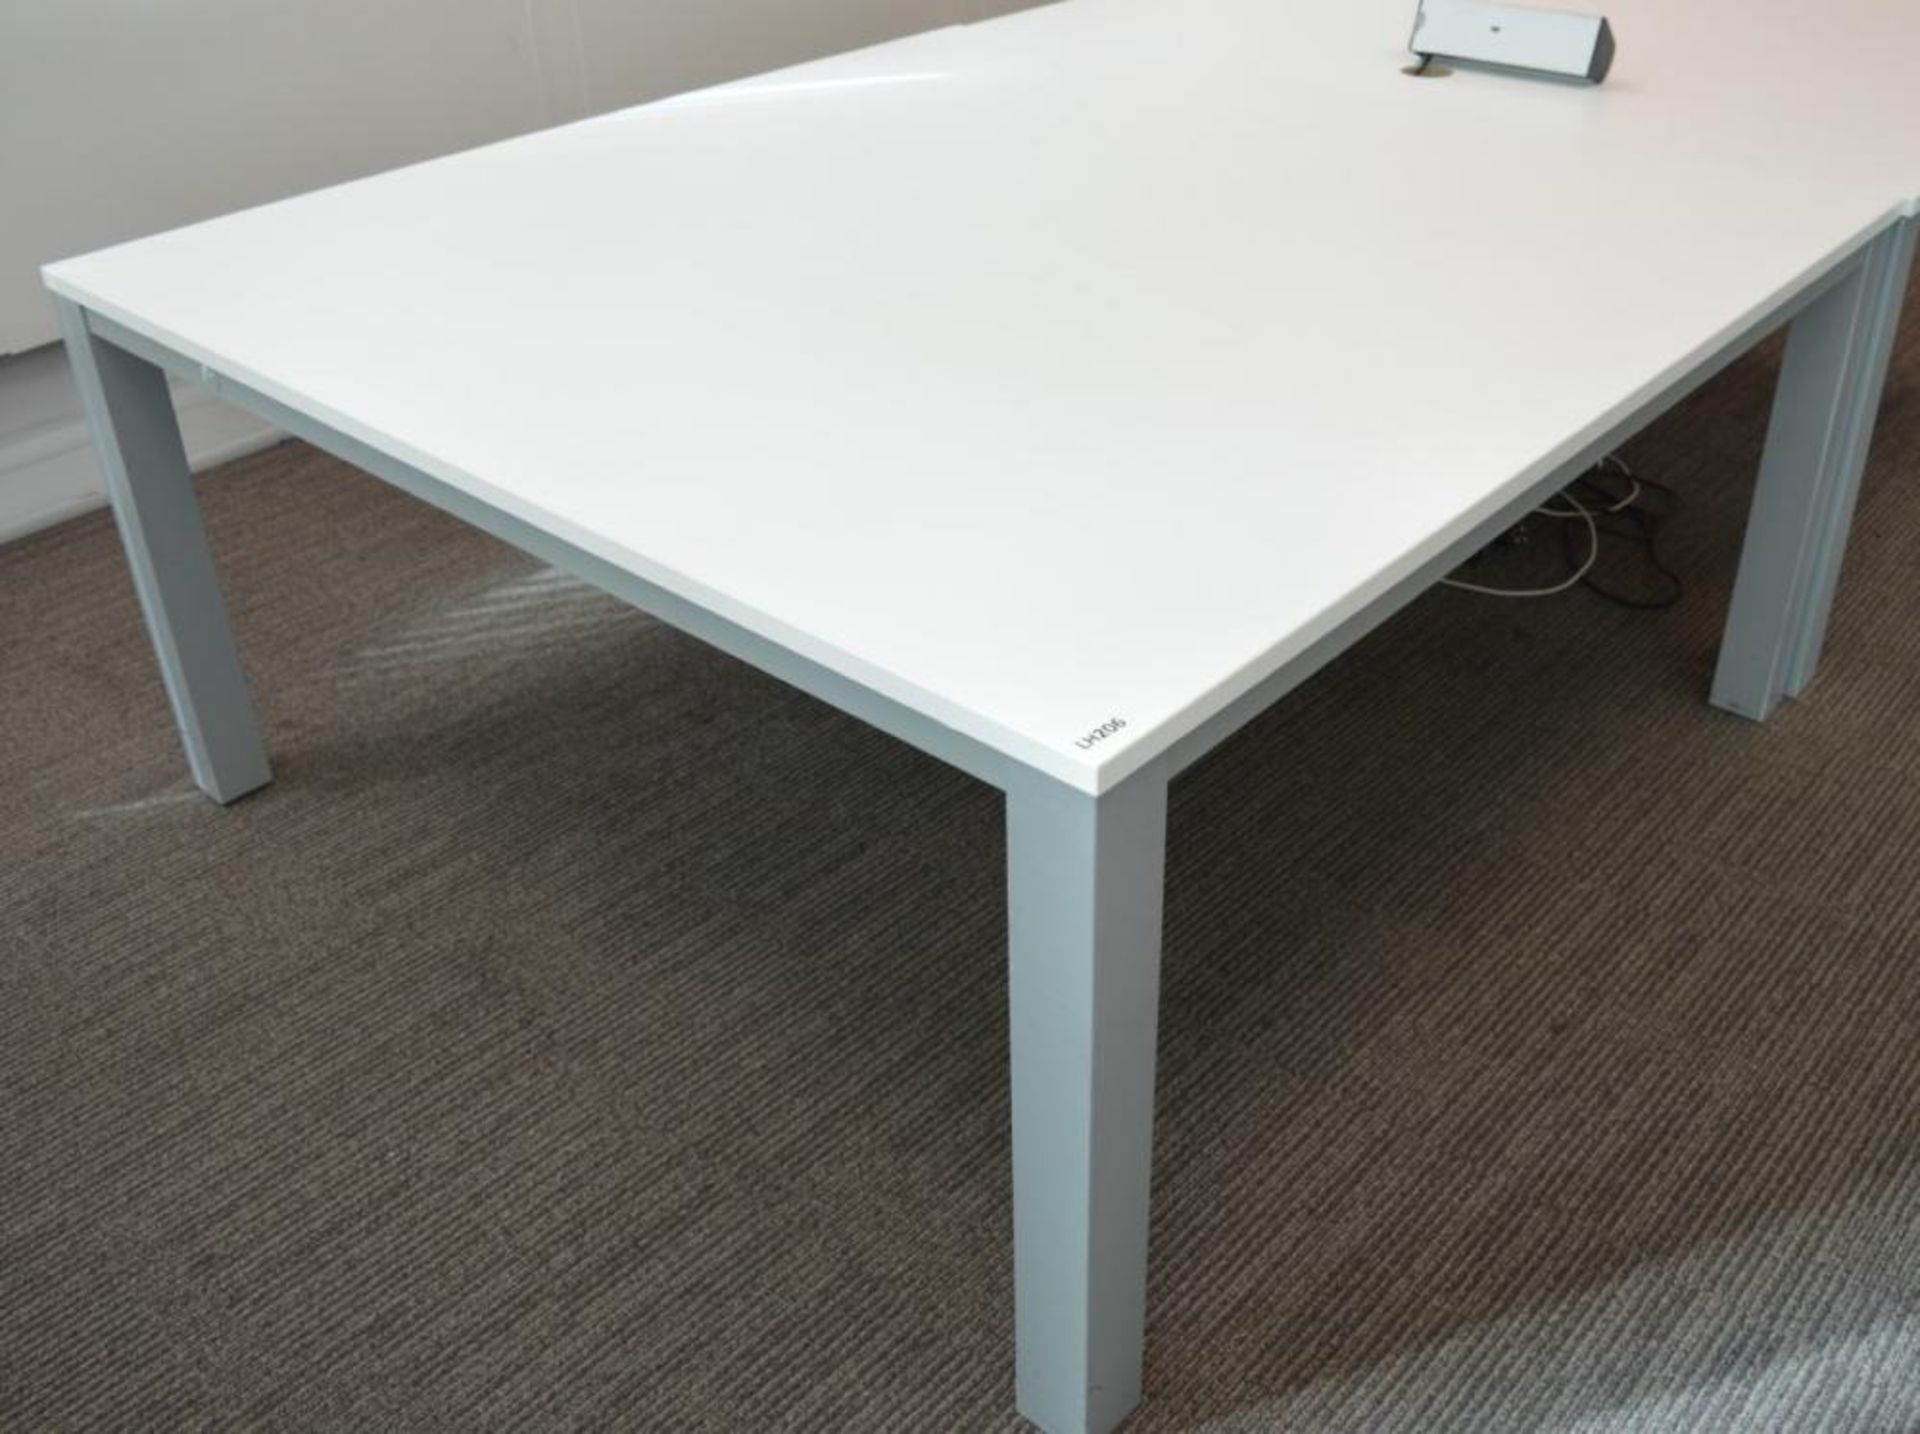 1 x Boardroom Meeting Table Finished With White Surface and Grey Metal Frame - H74 x L160 x W160 - Image 4 of 4